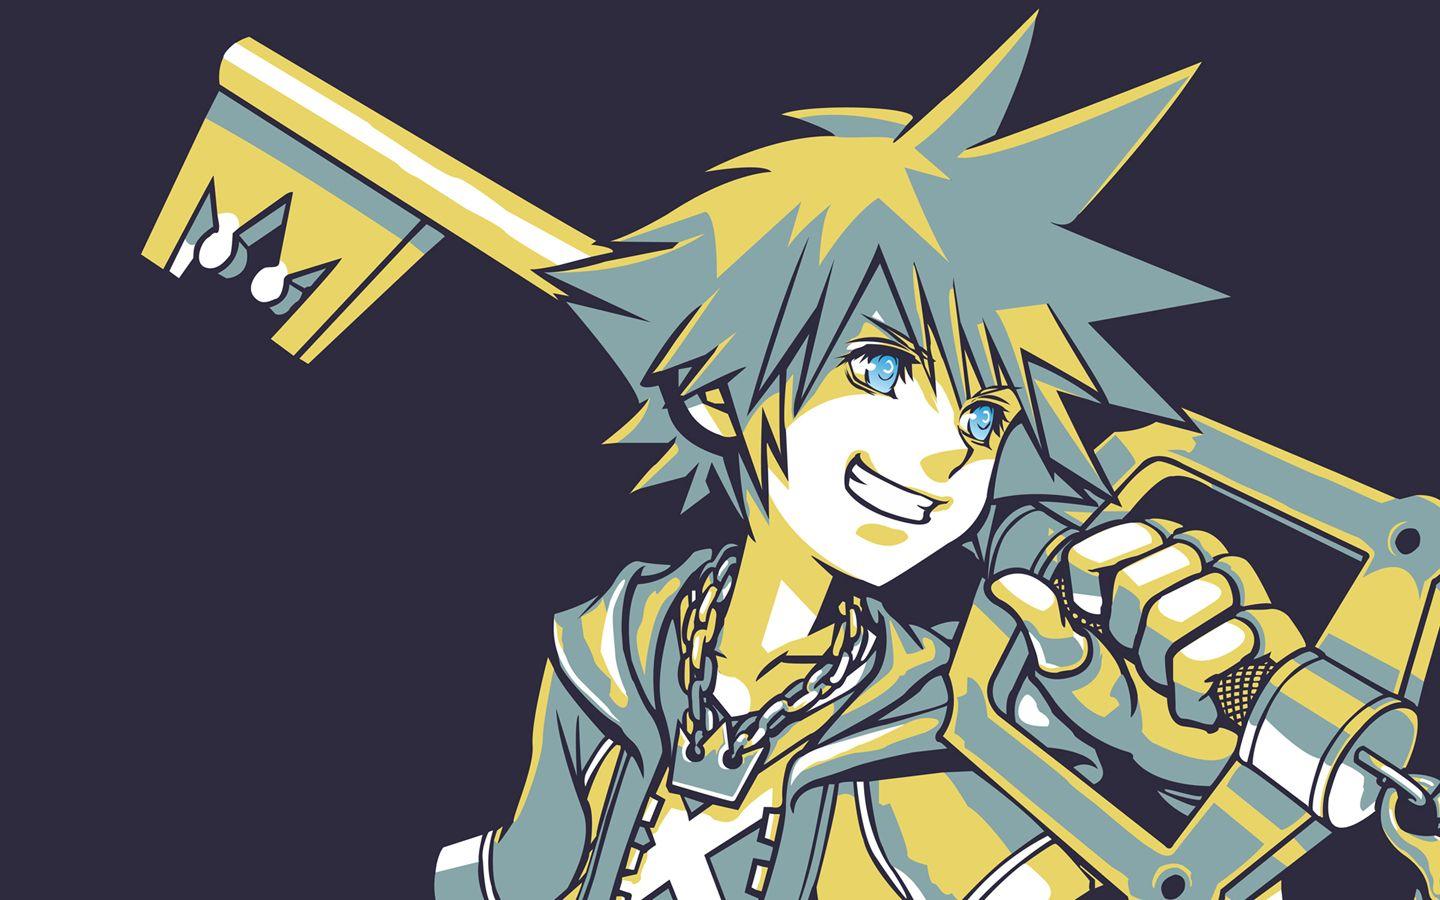 Kingdom Hearts Wallpapers Wallpaper Cave Images, Photos, Reviews